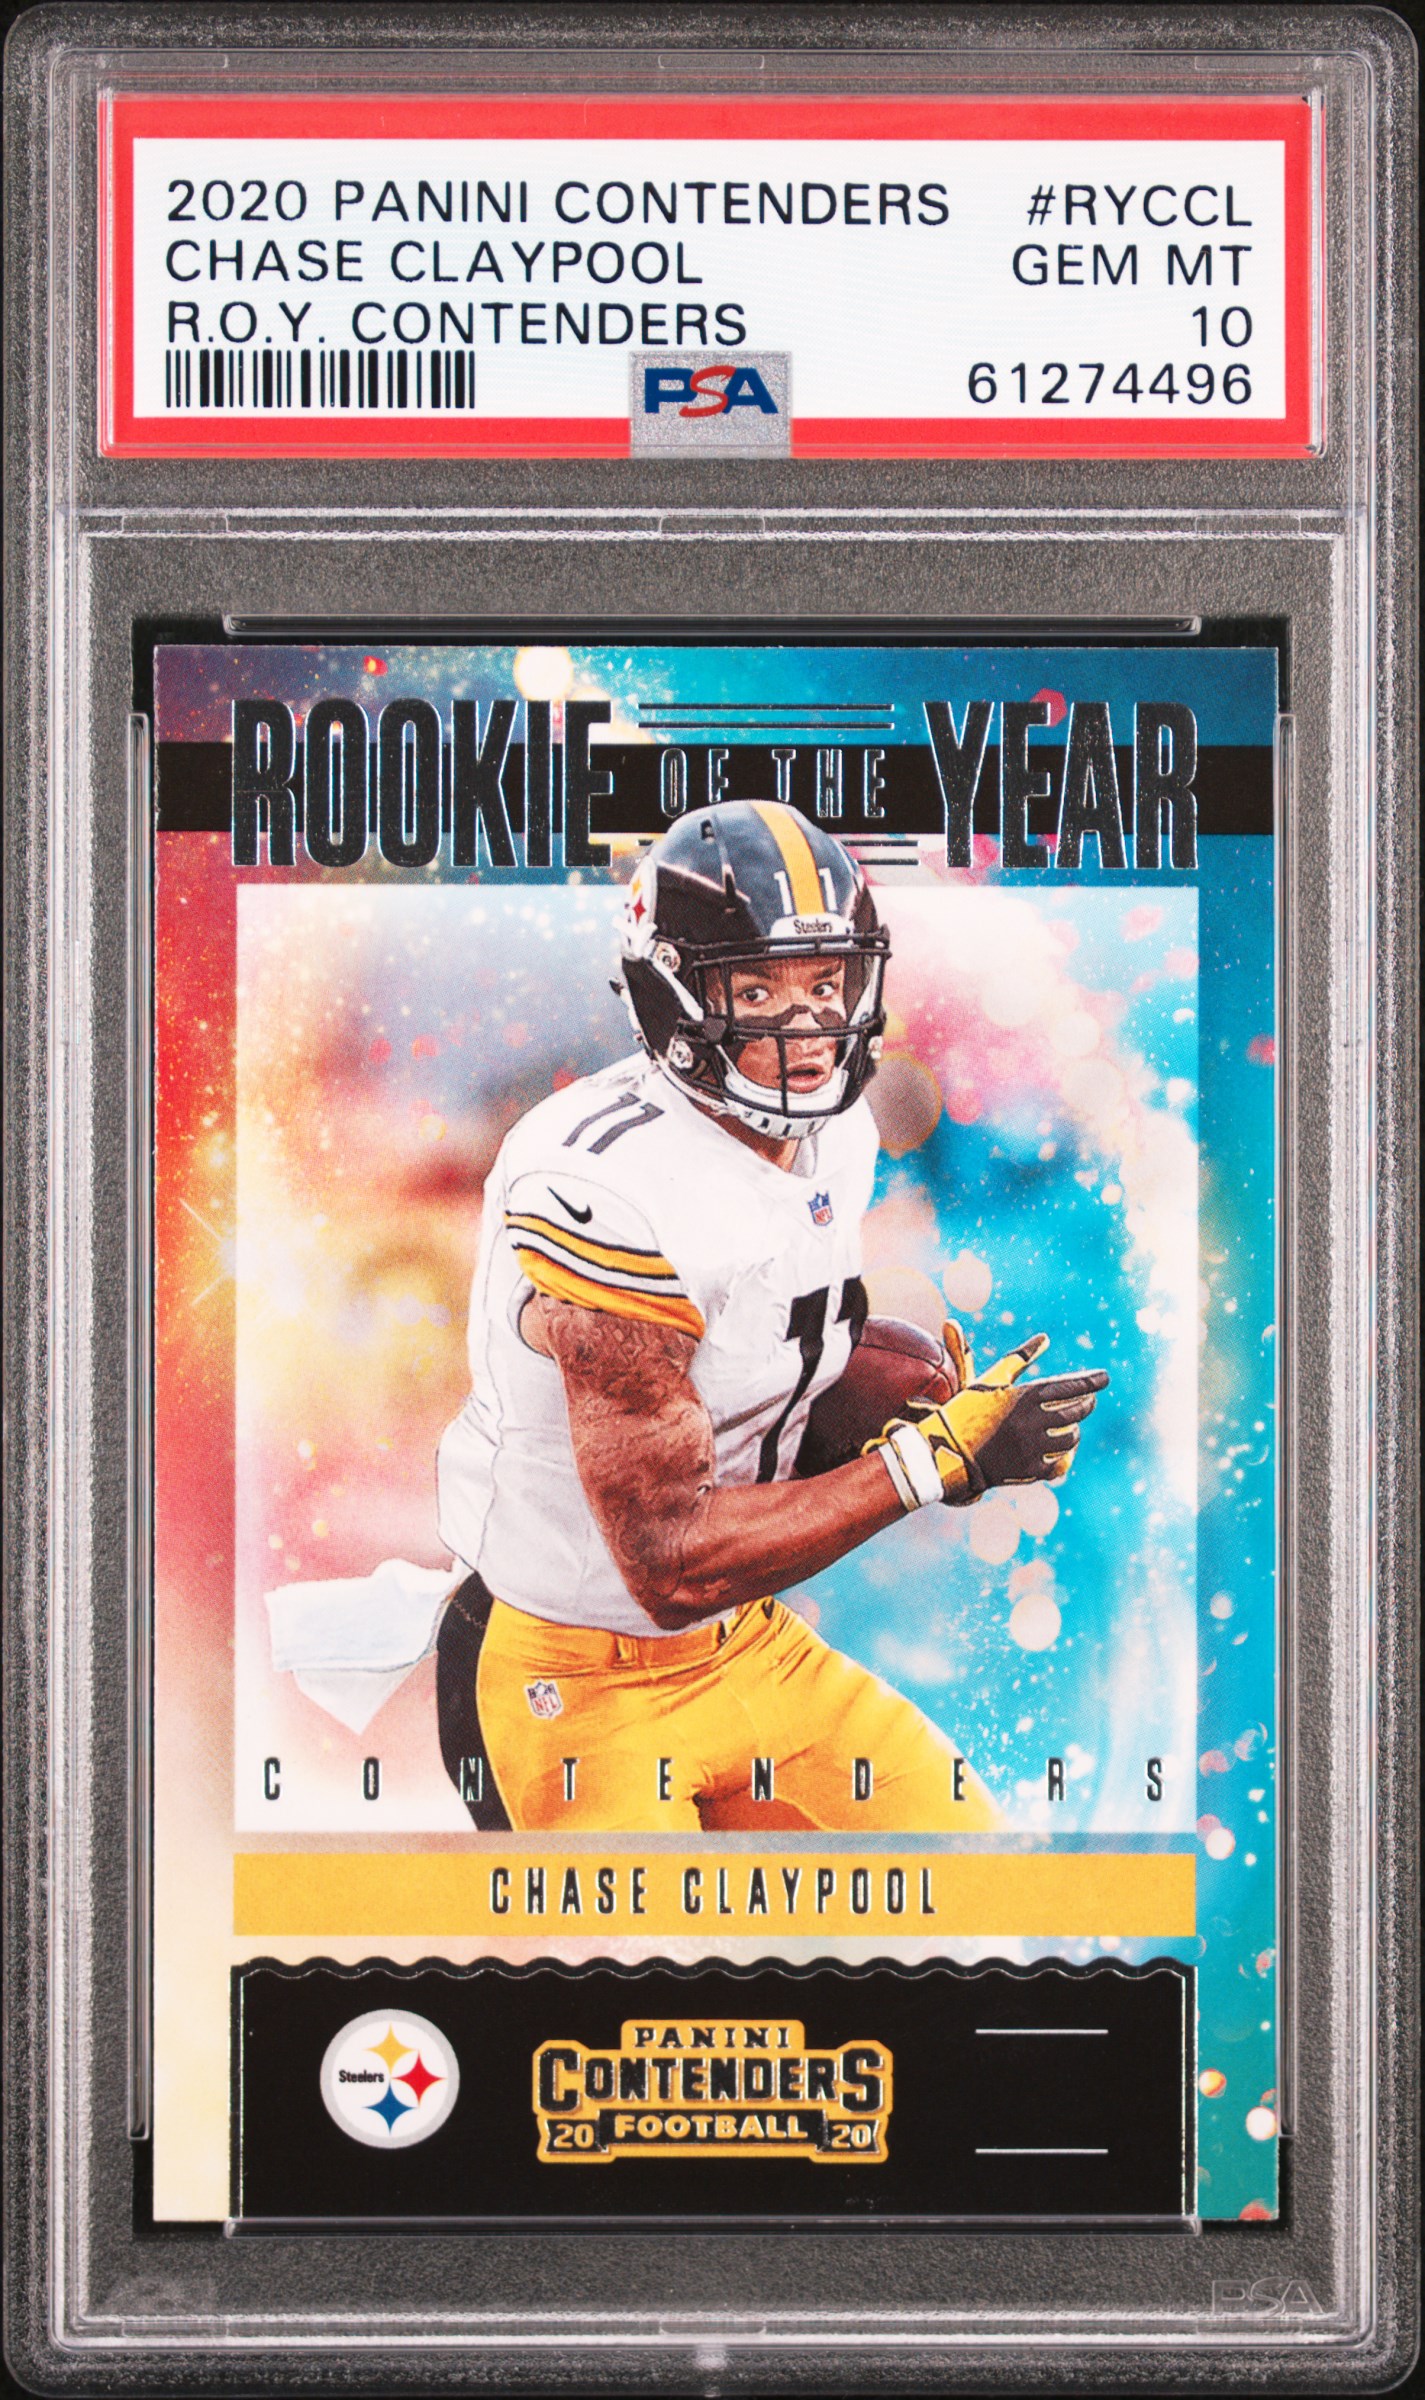 2020 Panini Contenders Rookie Of The Year Contenders #RYCCL Chase Claypool – PSA GEM MT 10